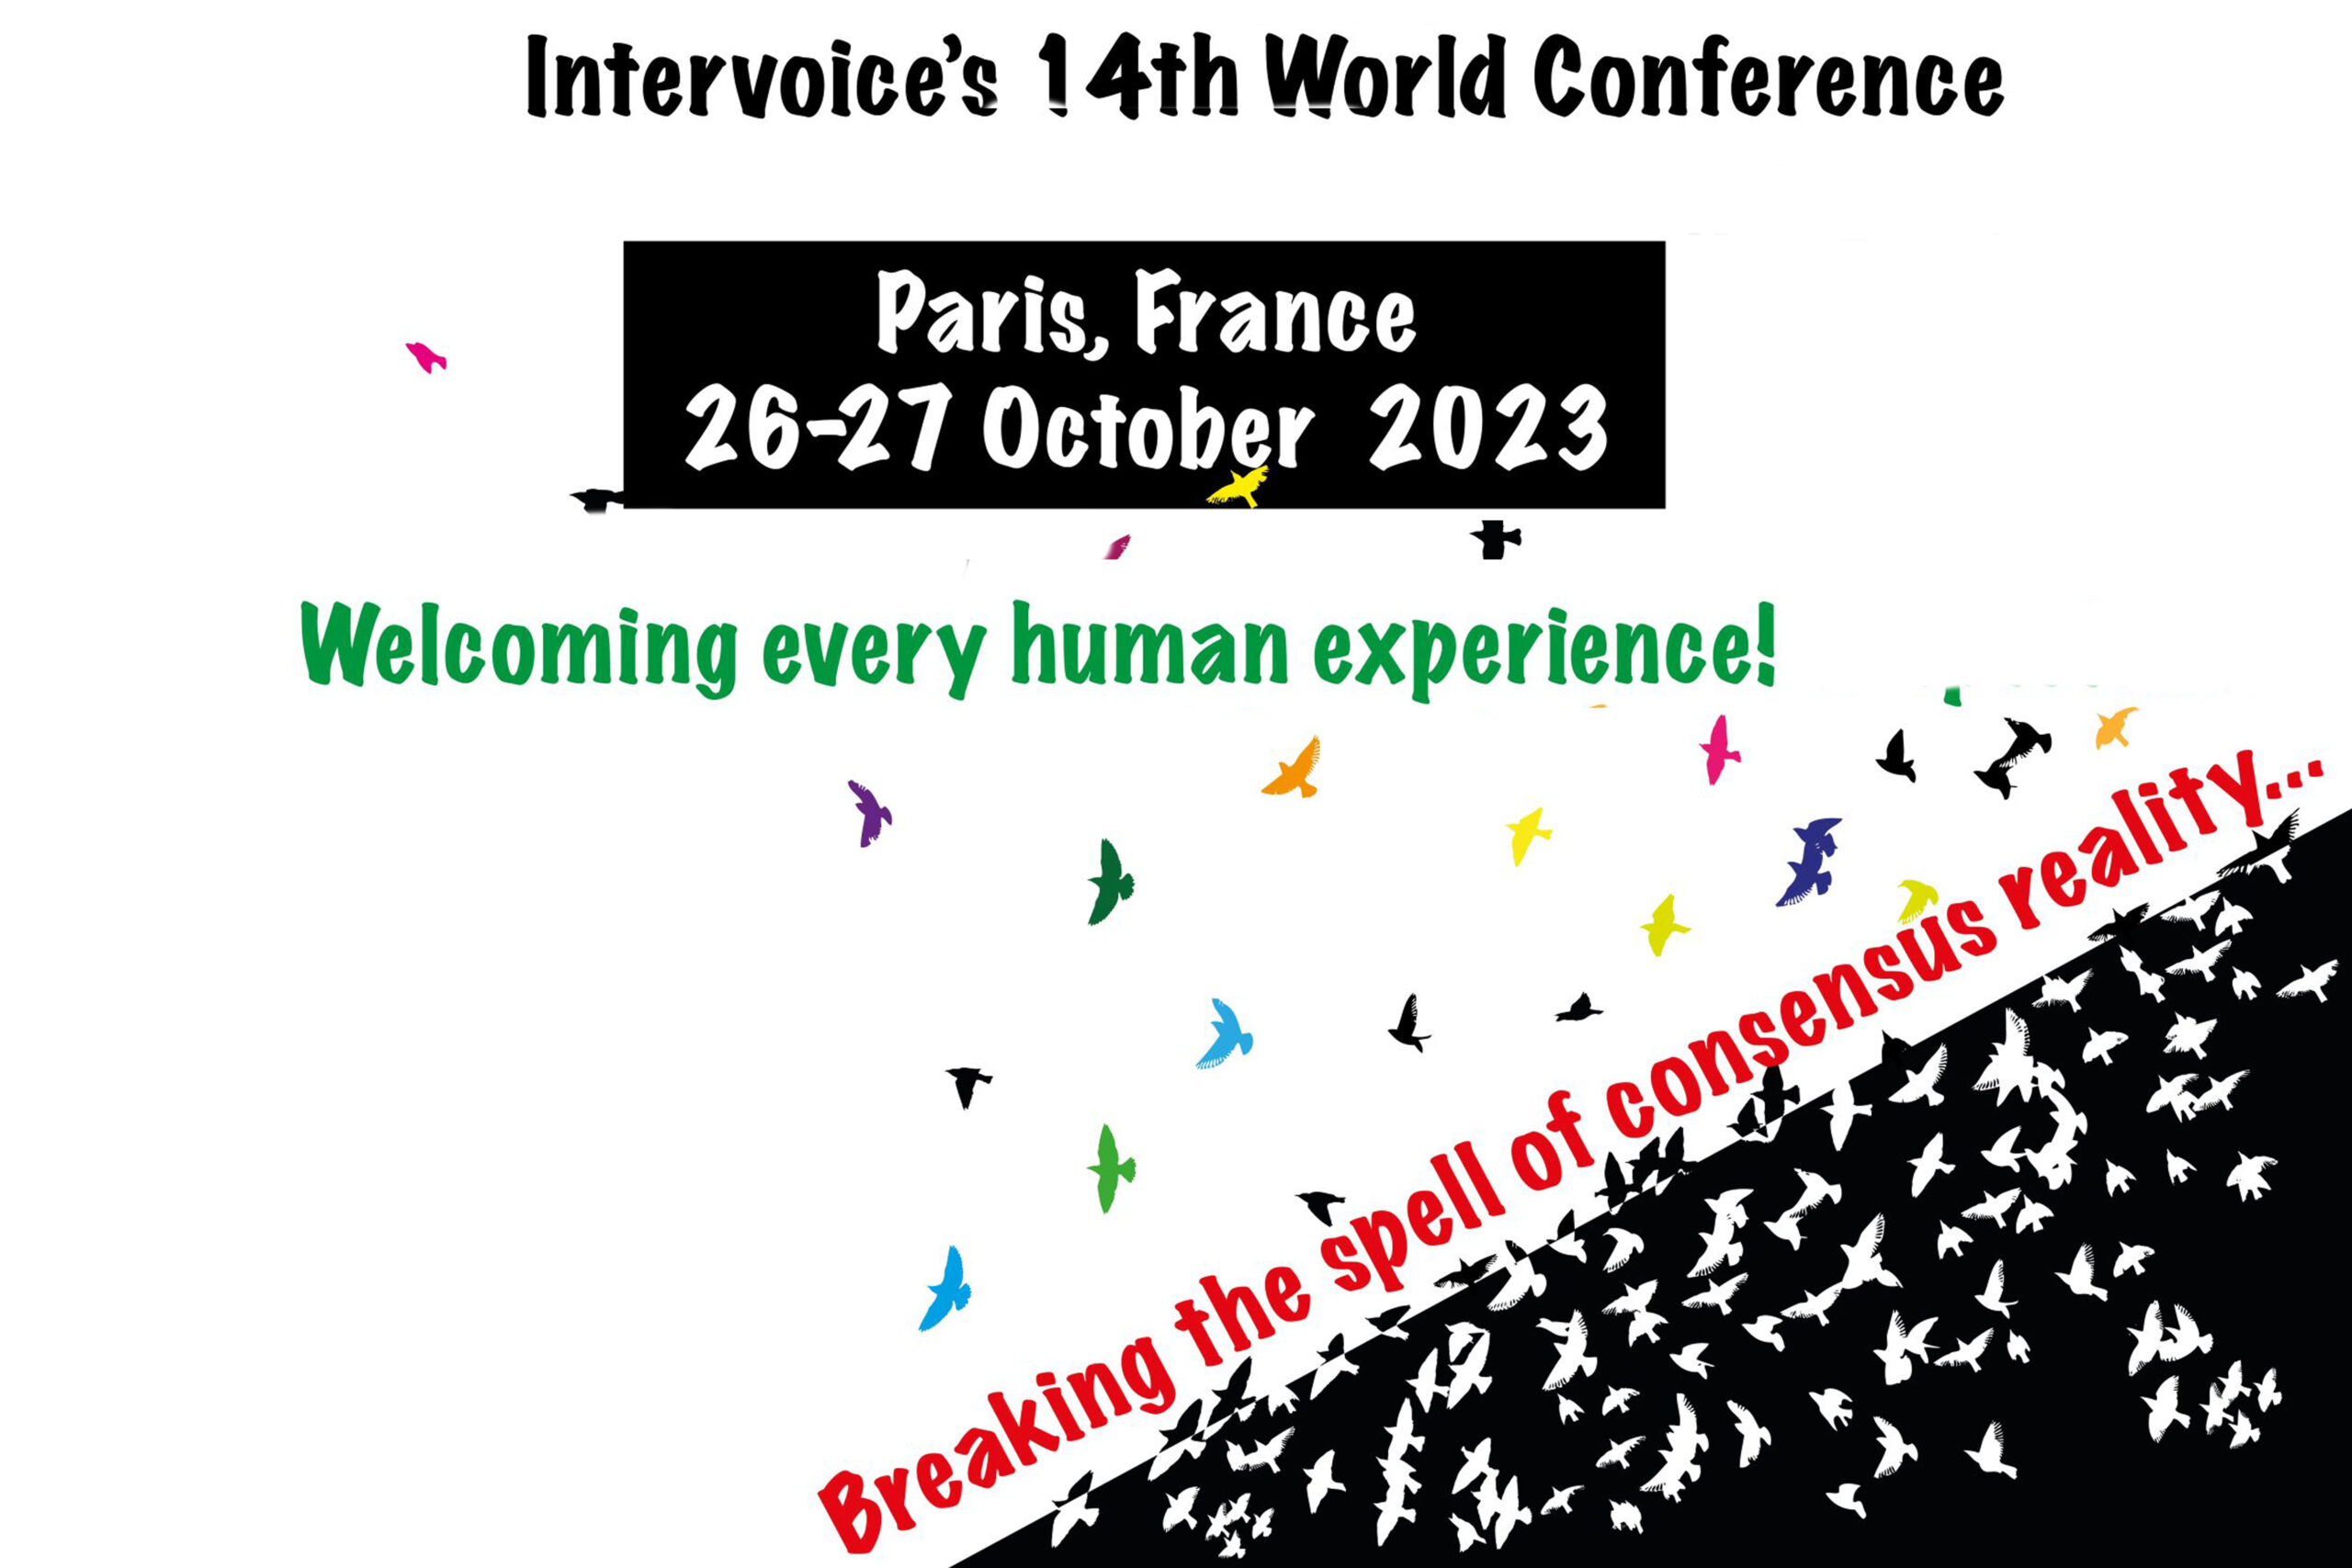 Intervoice’s 14 th world conference